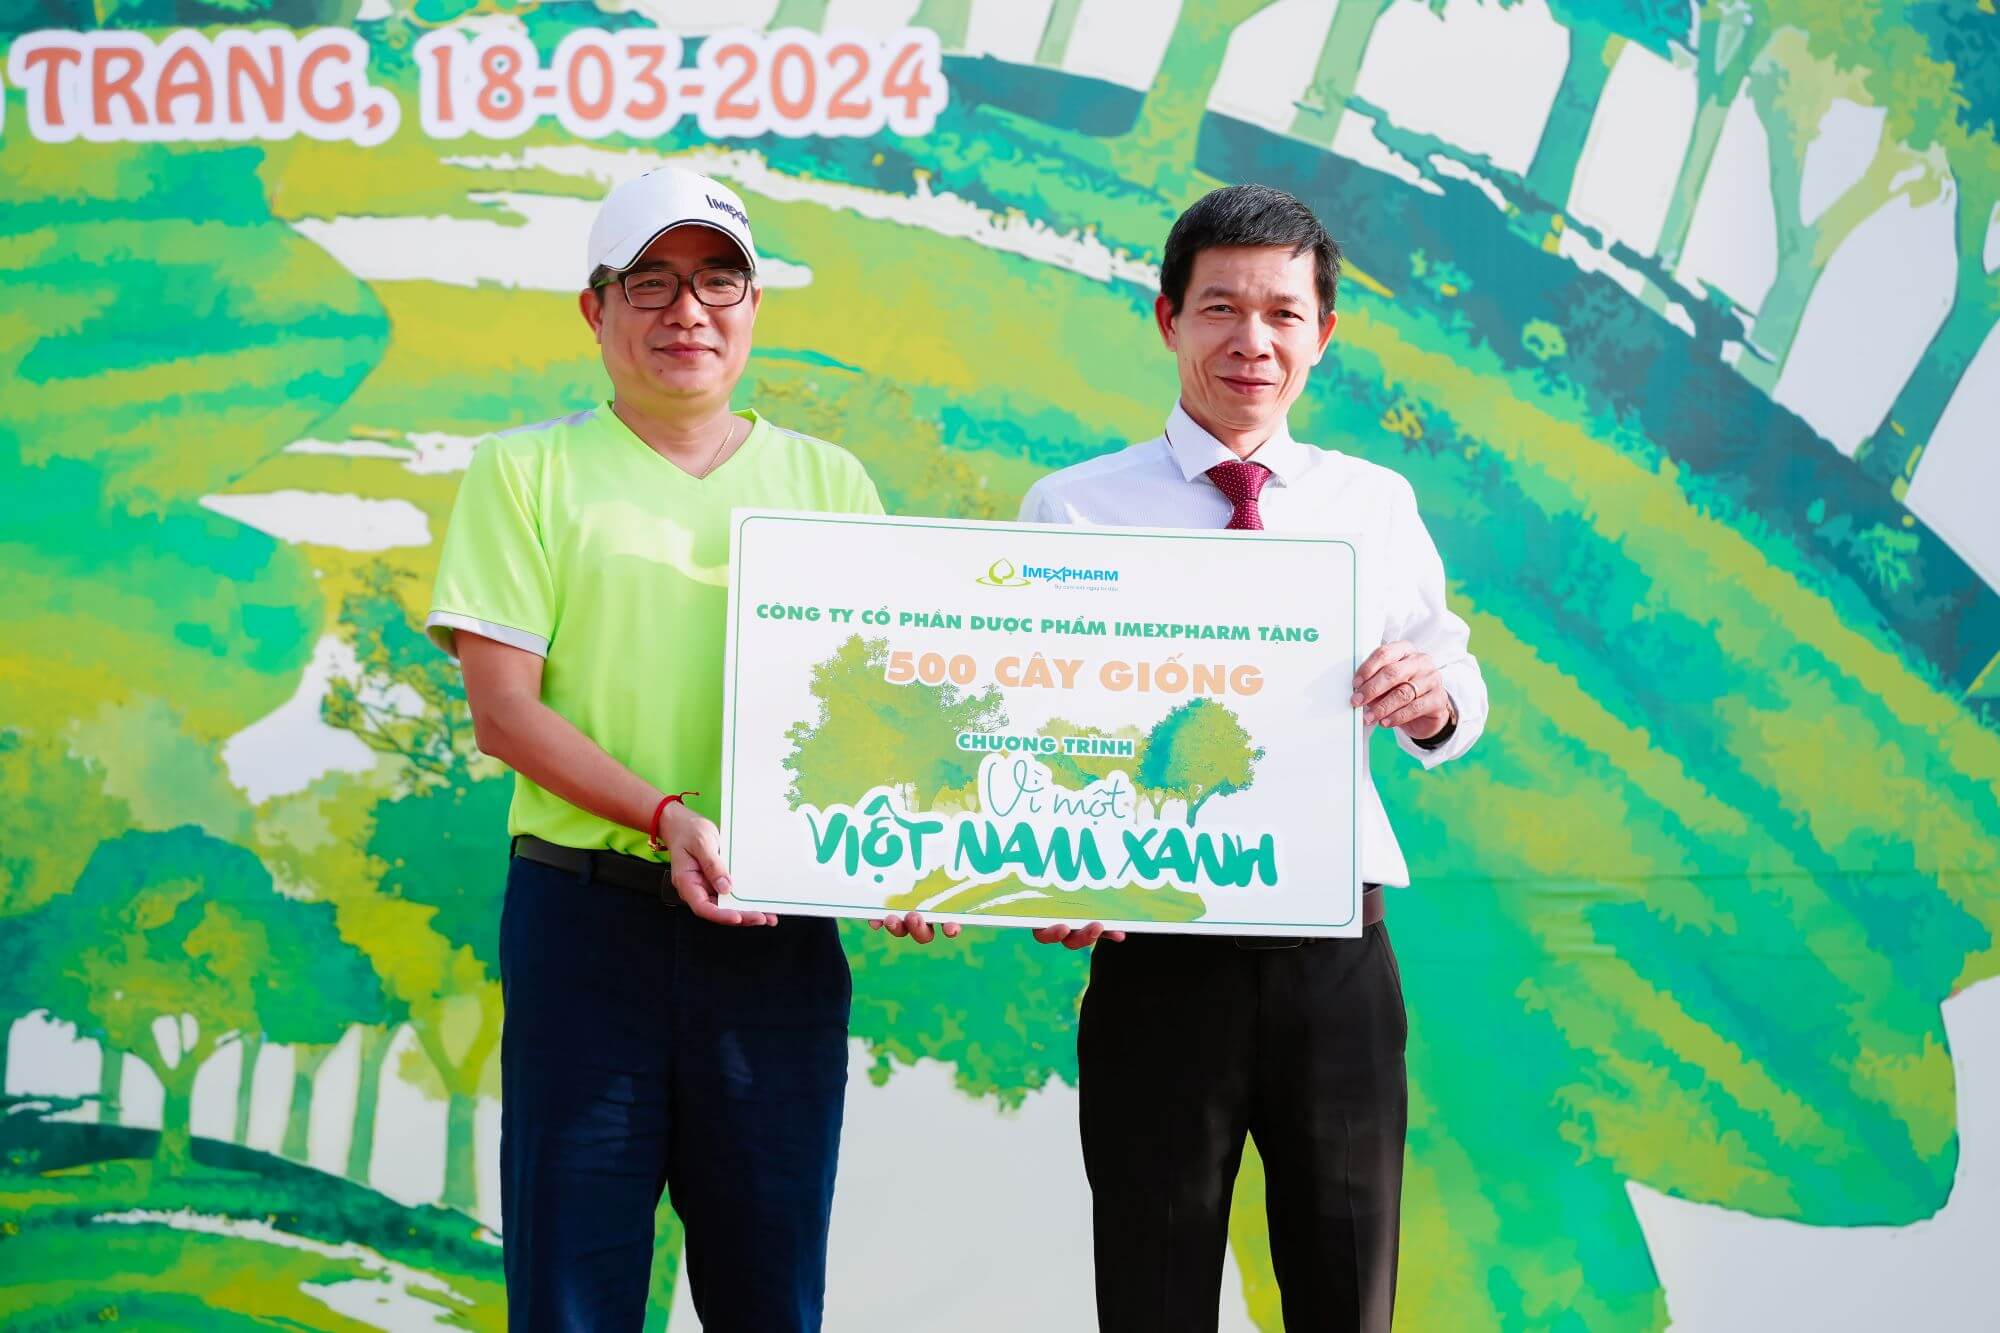 Imexpharm joins hand with Nha Trang city people's committee to protect the environment for a healthier life for every people